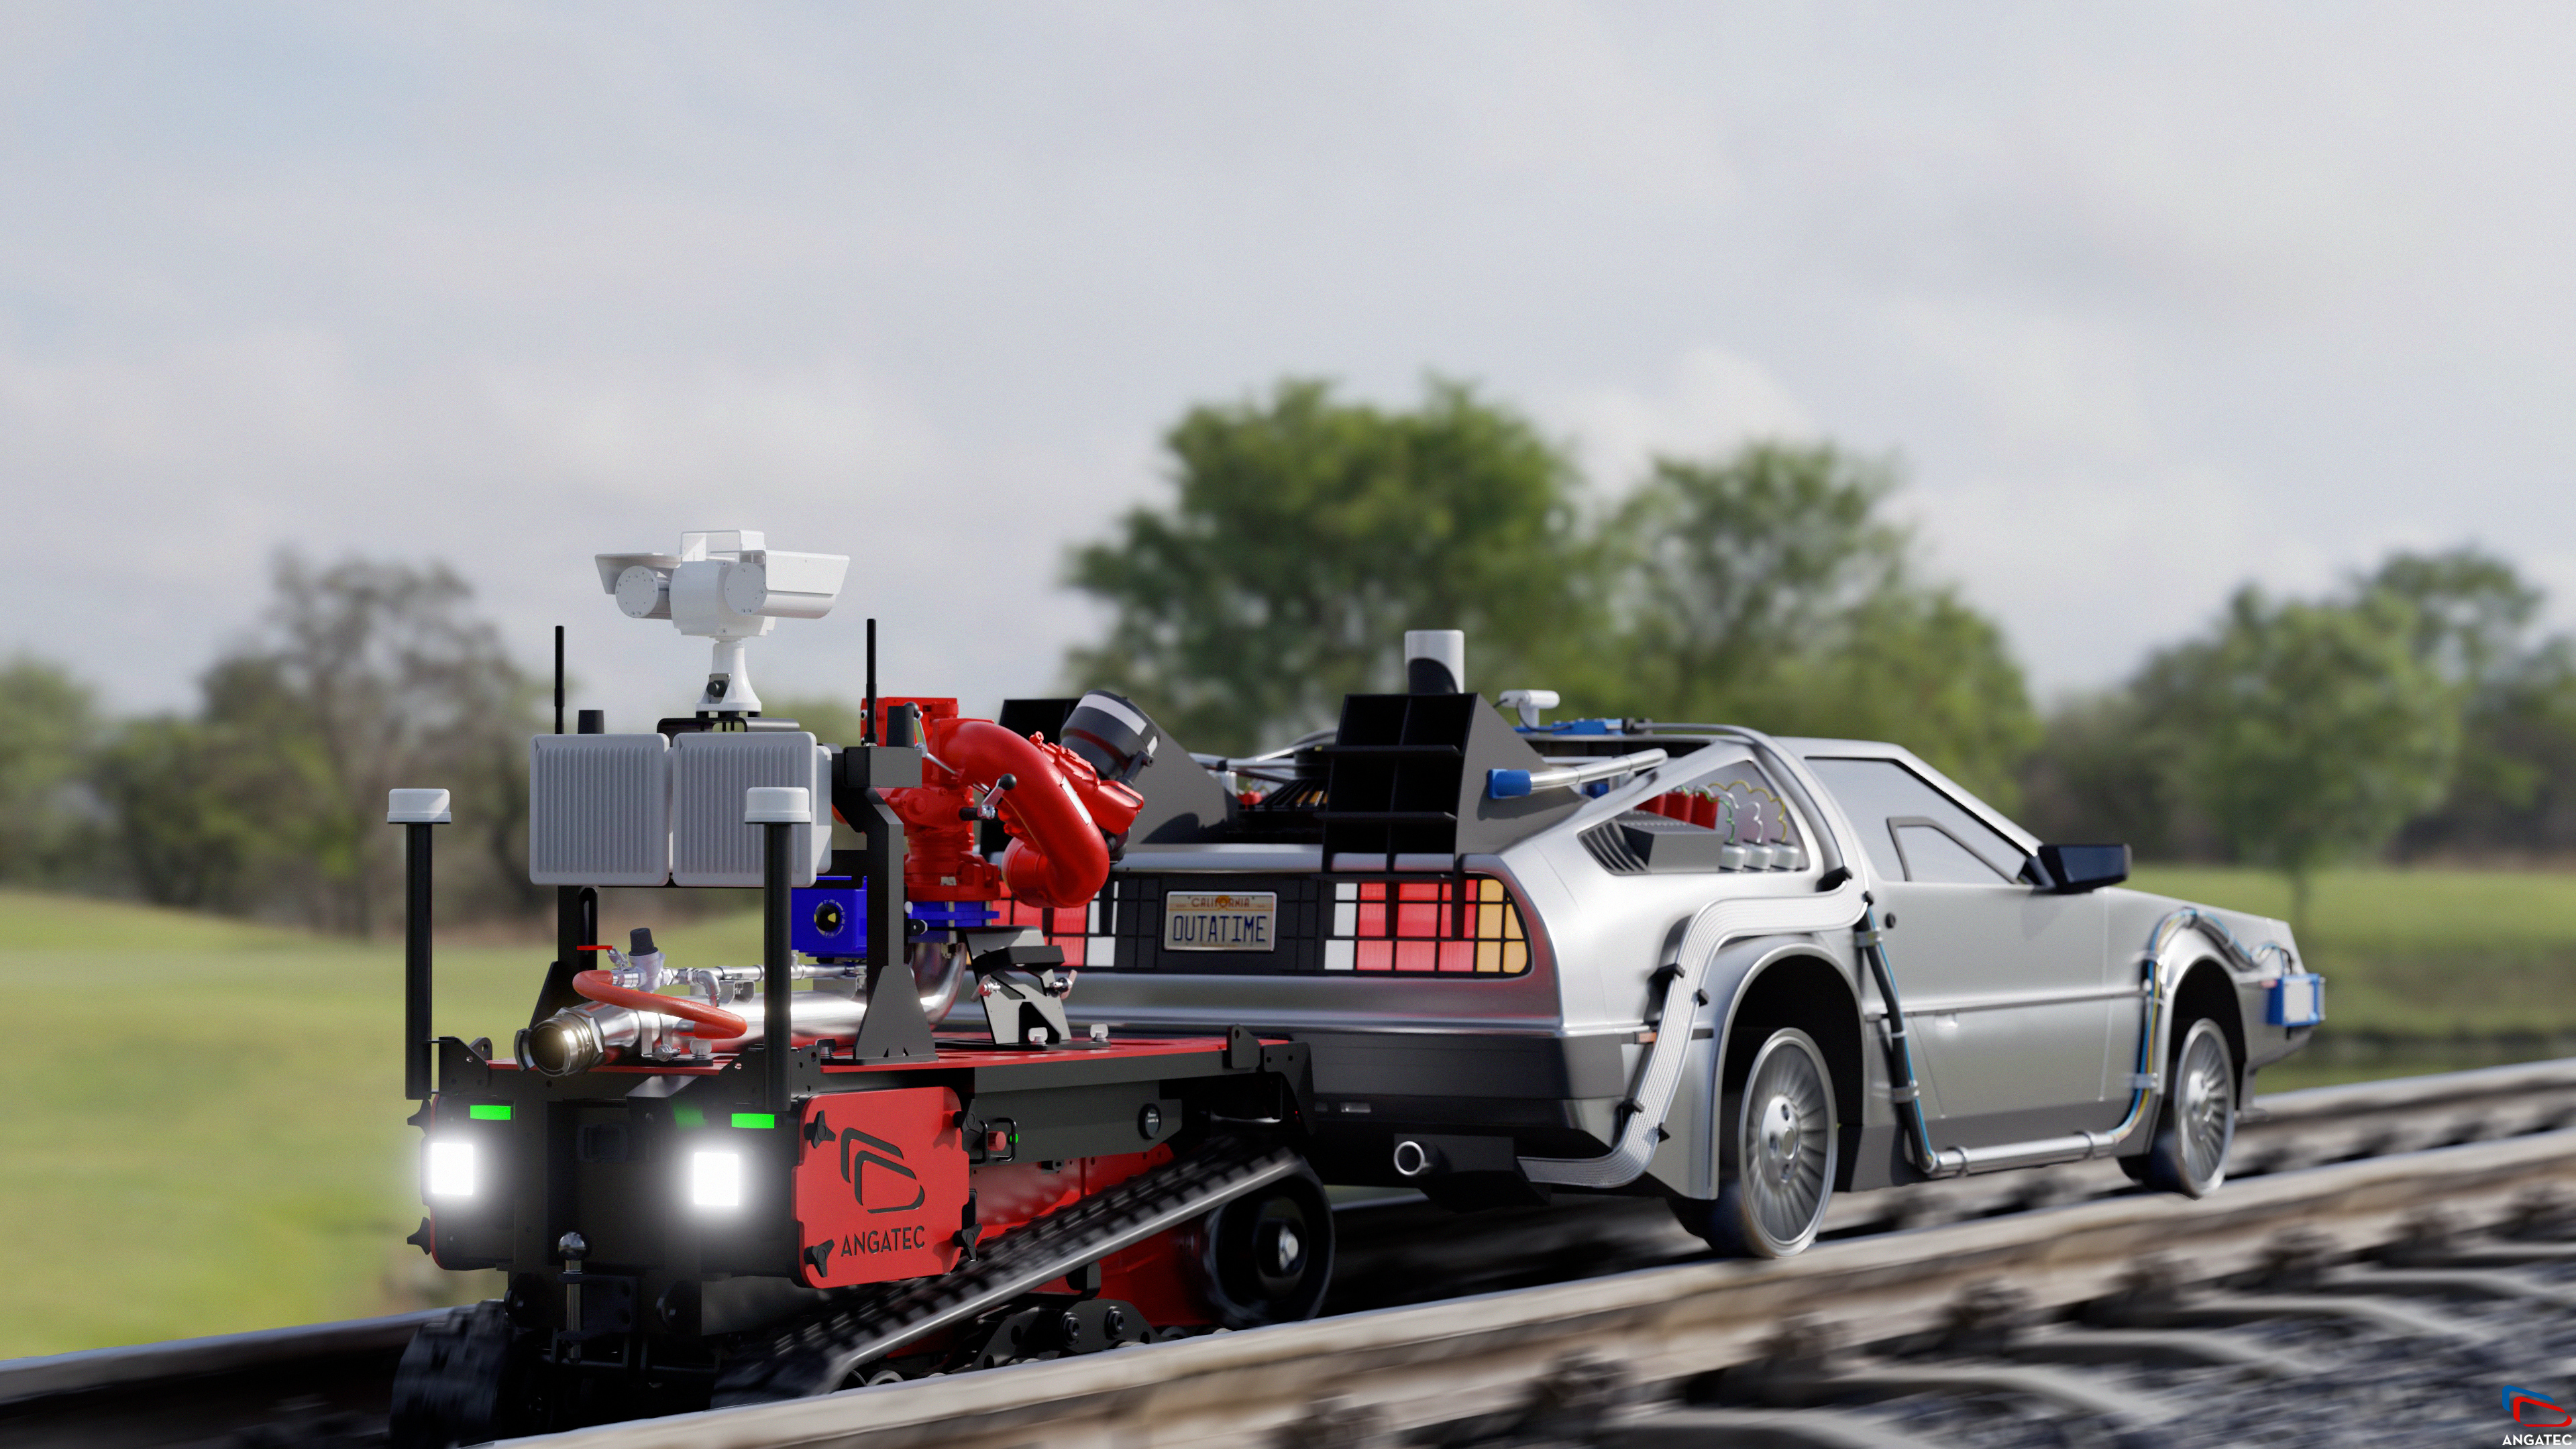 General 3840x2160 DeLorean Back to the Future III (Movie) Back to the Future firefighter robot TEC800 angatec Blender licence plates futuristic digital art